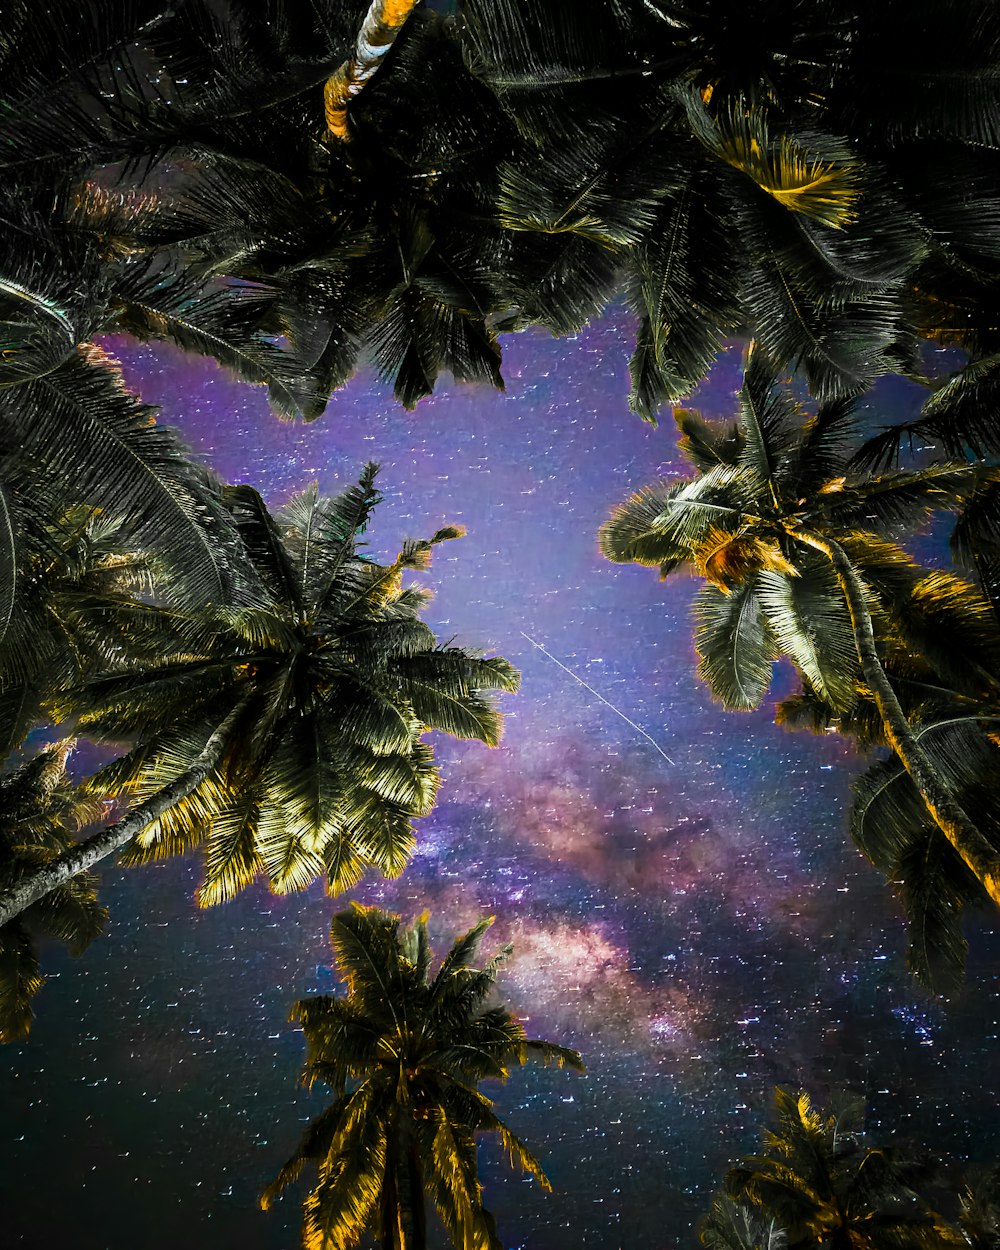 a night sky with palm trees and the milky